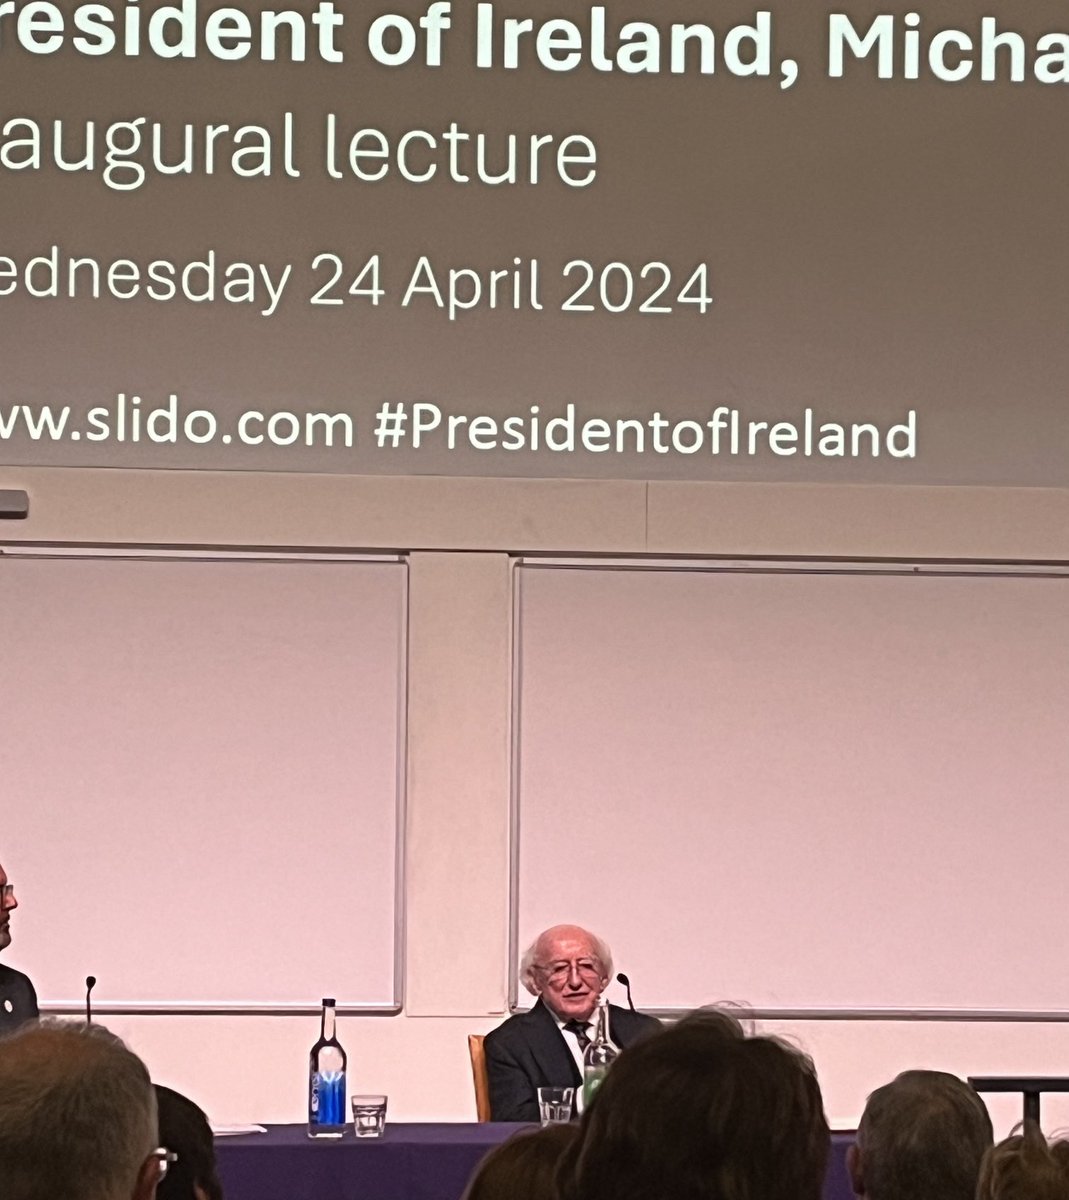 I enjoyed the wide ranging lecture from ⁦@PresidentIRL⁩ at ⁦@UoMNews⁩ ⁦@OfficialUoM⁩ this evening. Spanning centuries and continents, prose and poetry. Thank you a memorable occasion John Kennedy lecture #presidentofireland